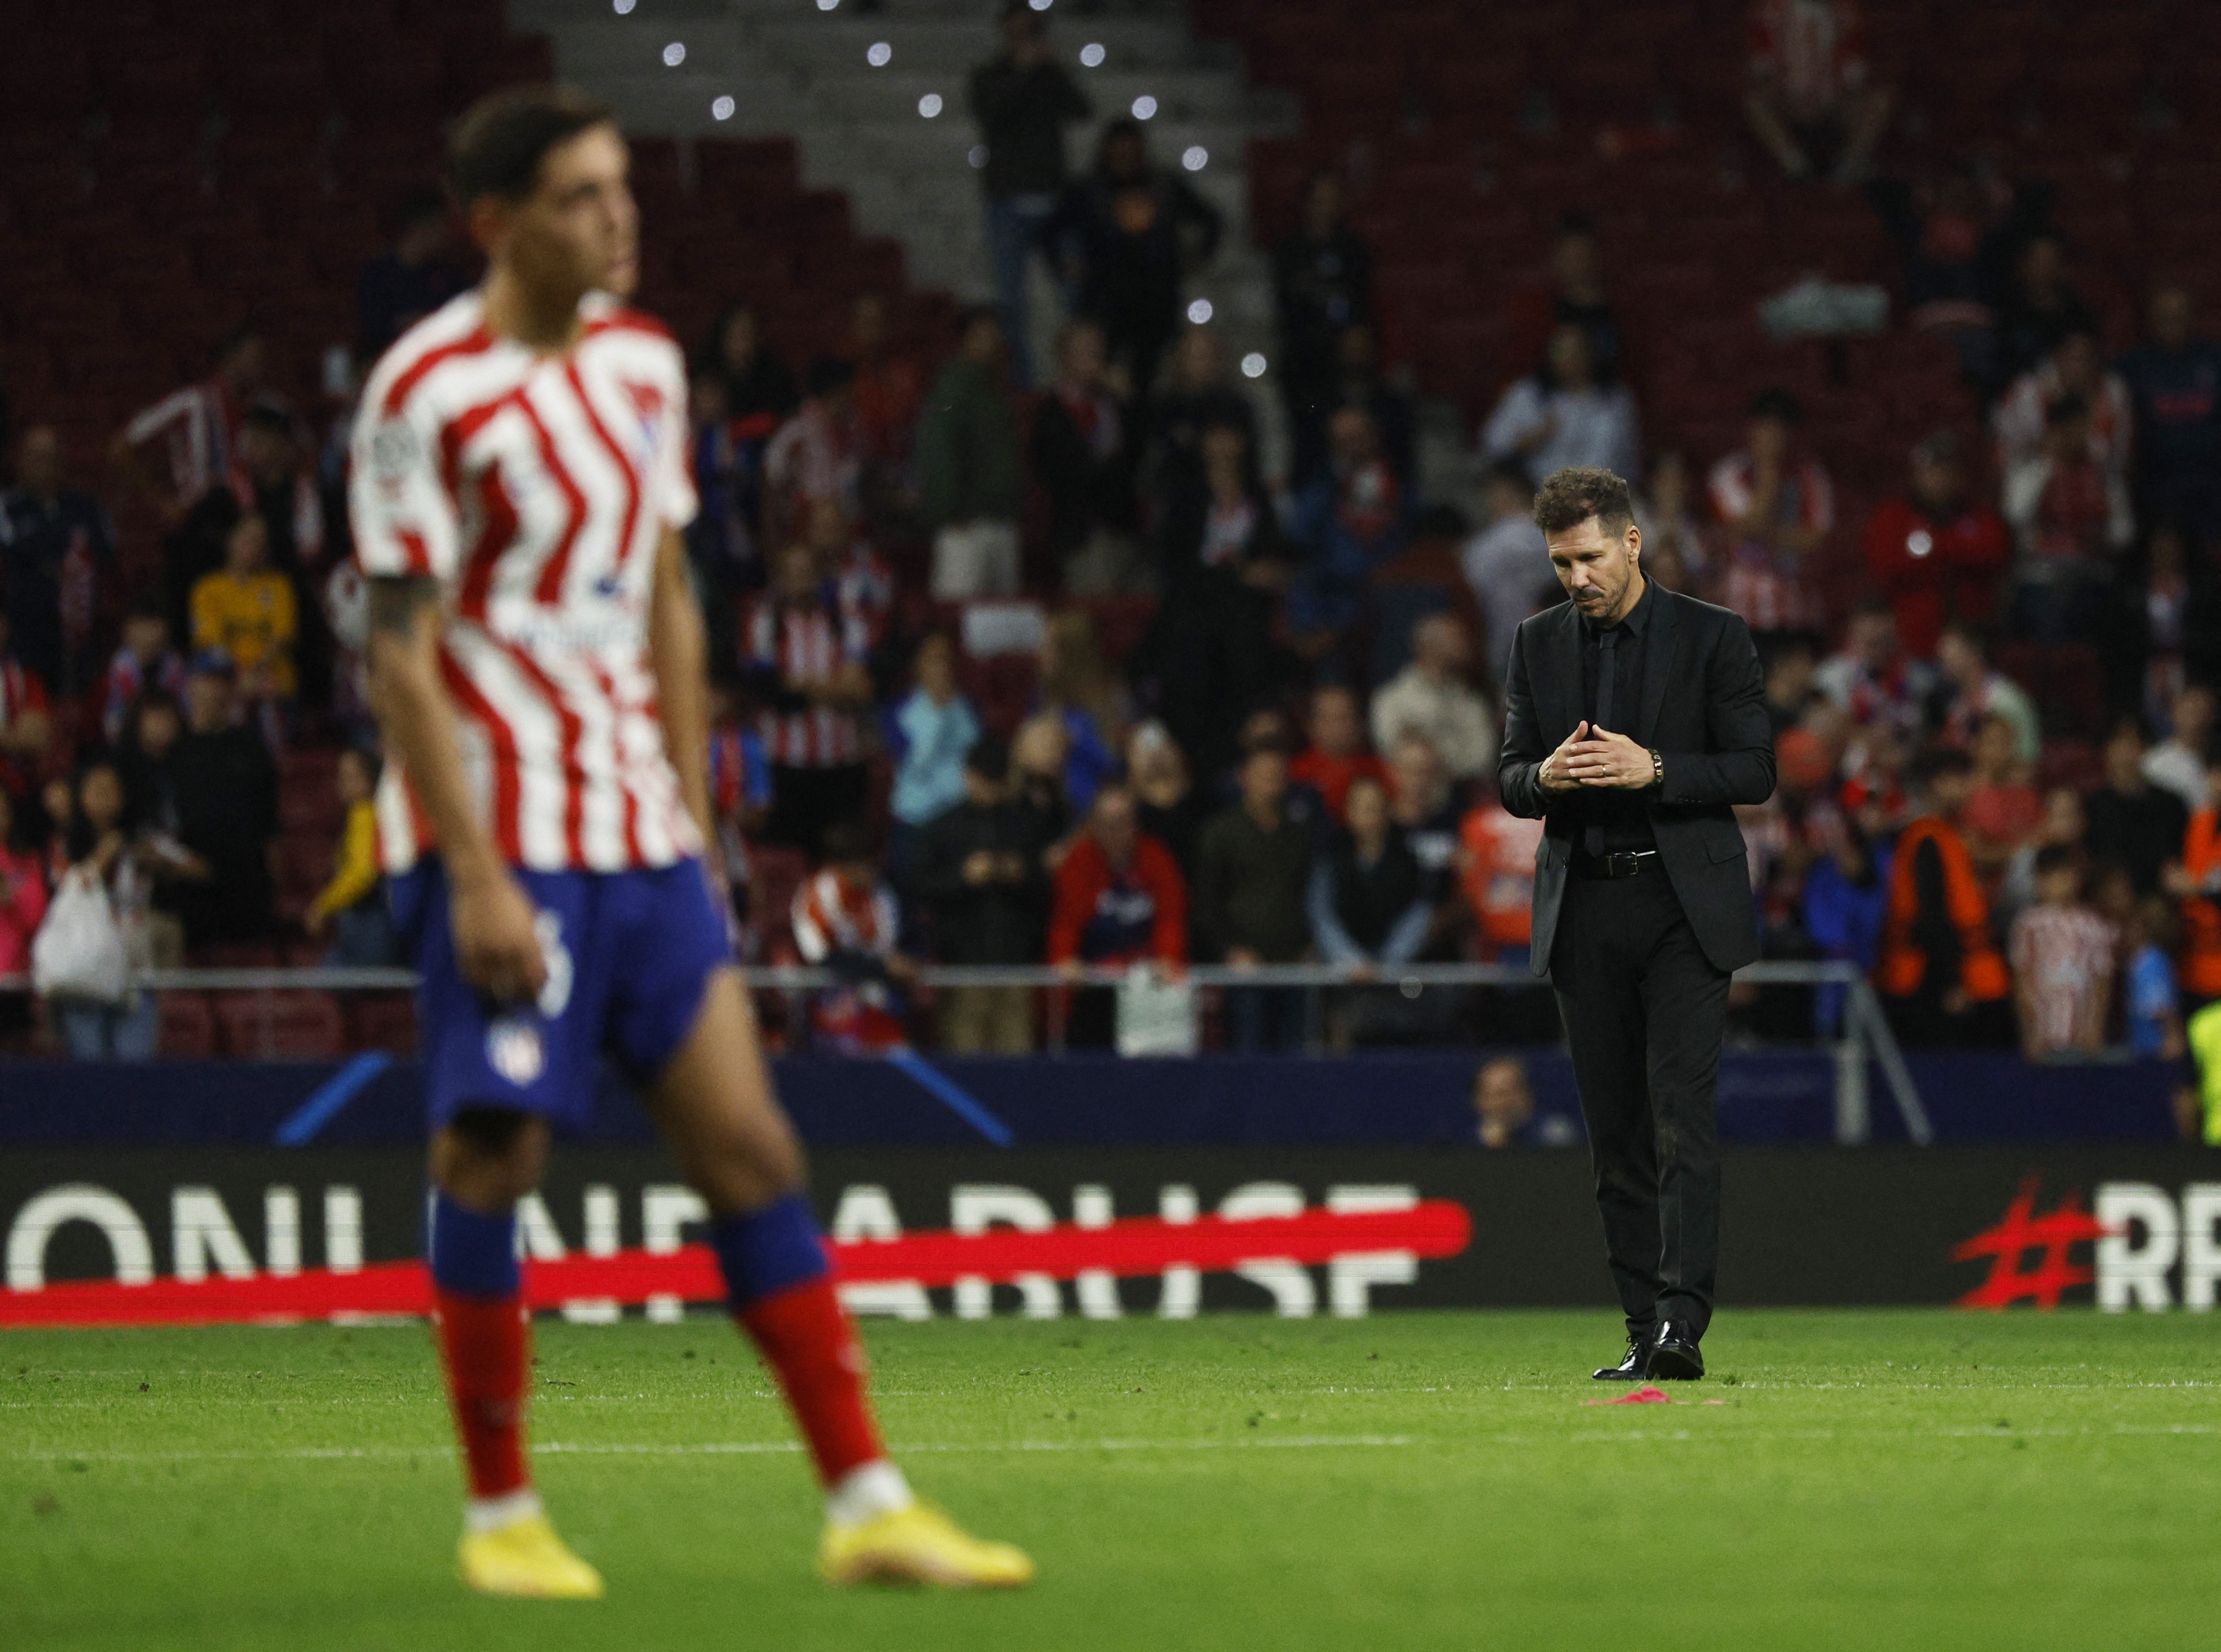 Soccer Football - Champions League - Group B - Atletico Madrid v Bayer Leverkusen - Metropolitano, Madrid, Spain - October 26, 2022  Atletico Madrid coach Diego Simeone reacts after the match REUTERS/Susana Vera